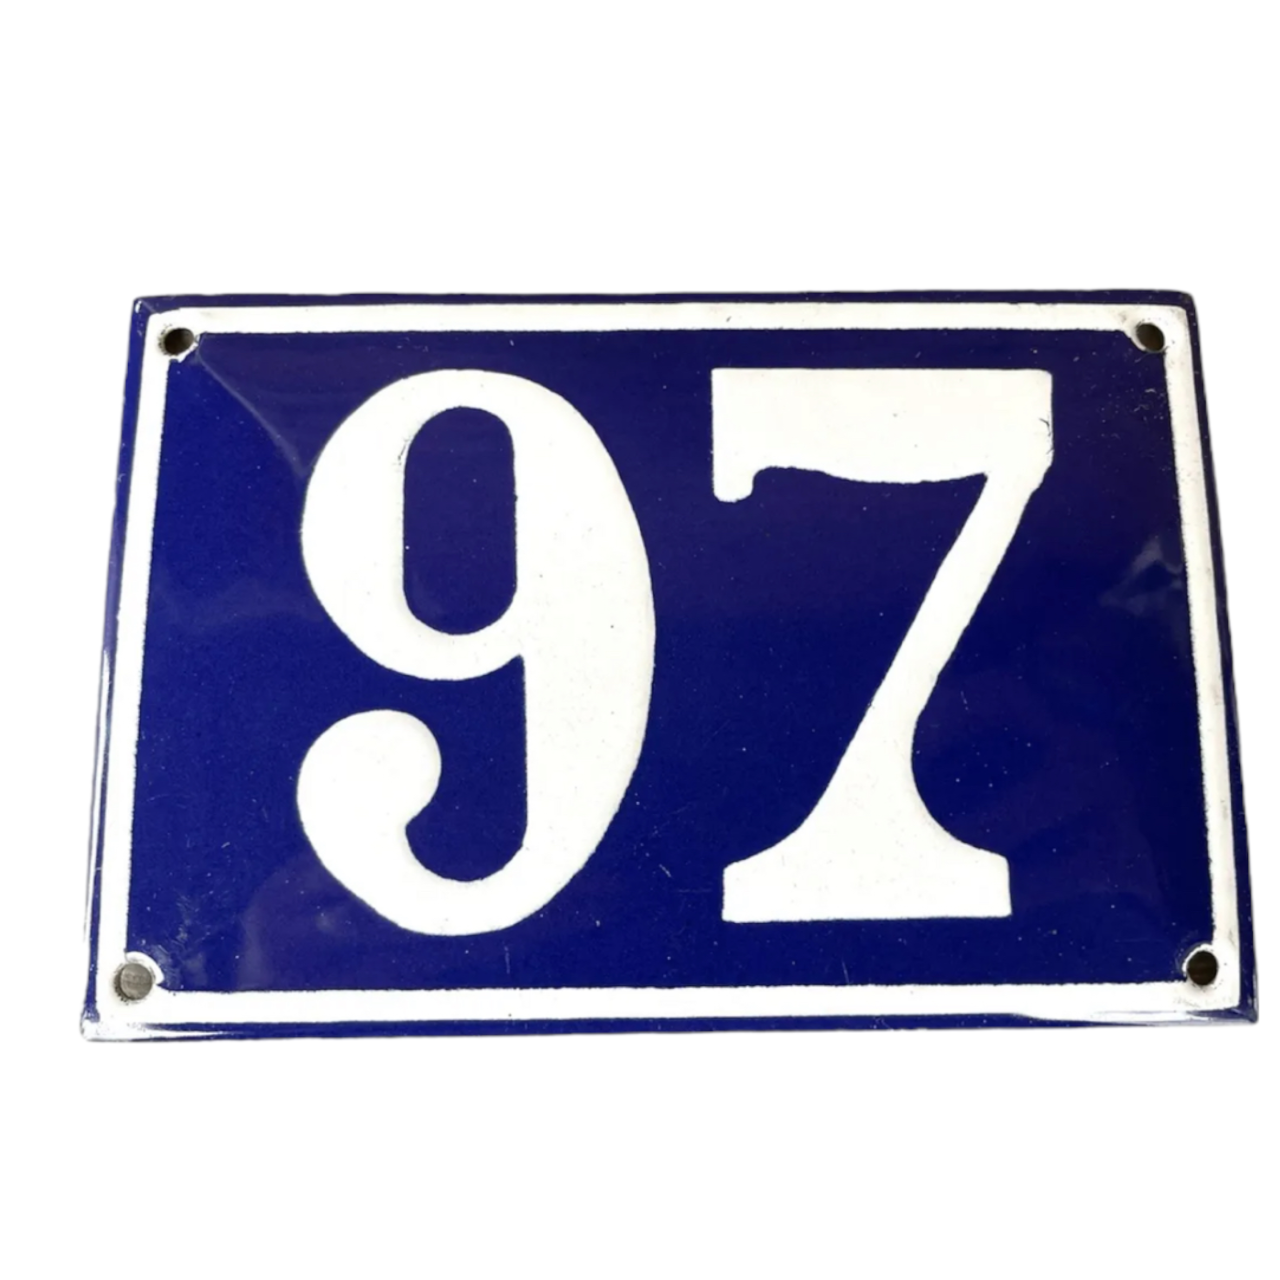 French vintage enamel door number 97 house number 97 sold by All Things French Store